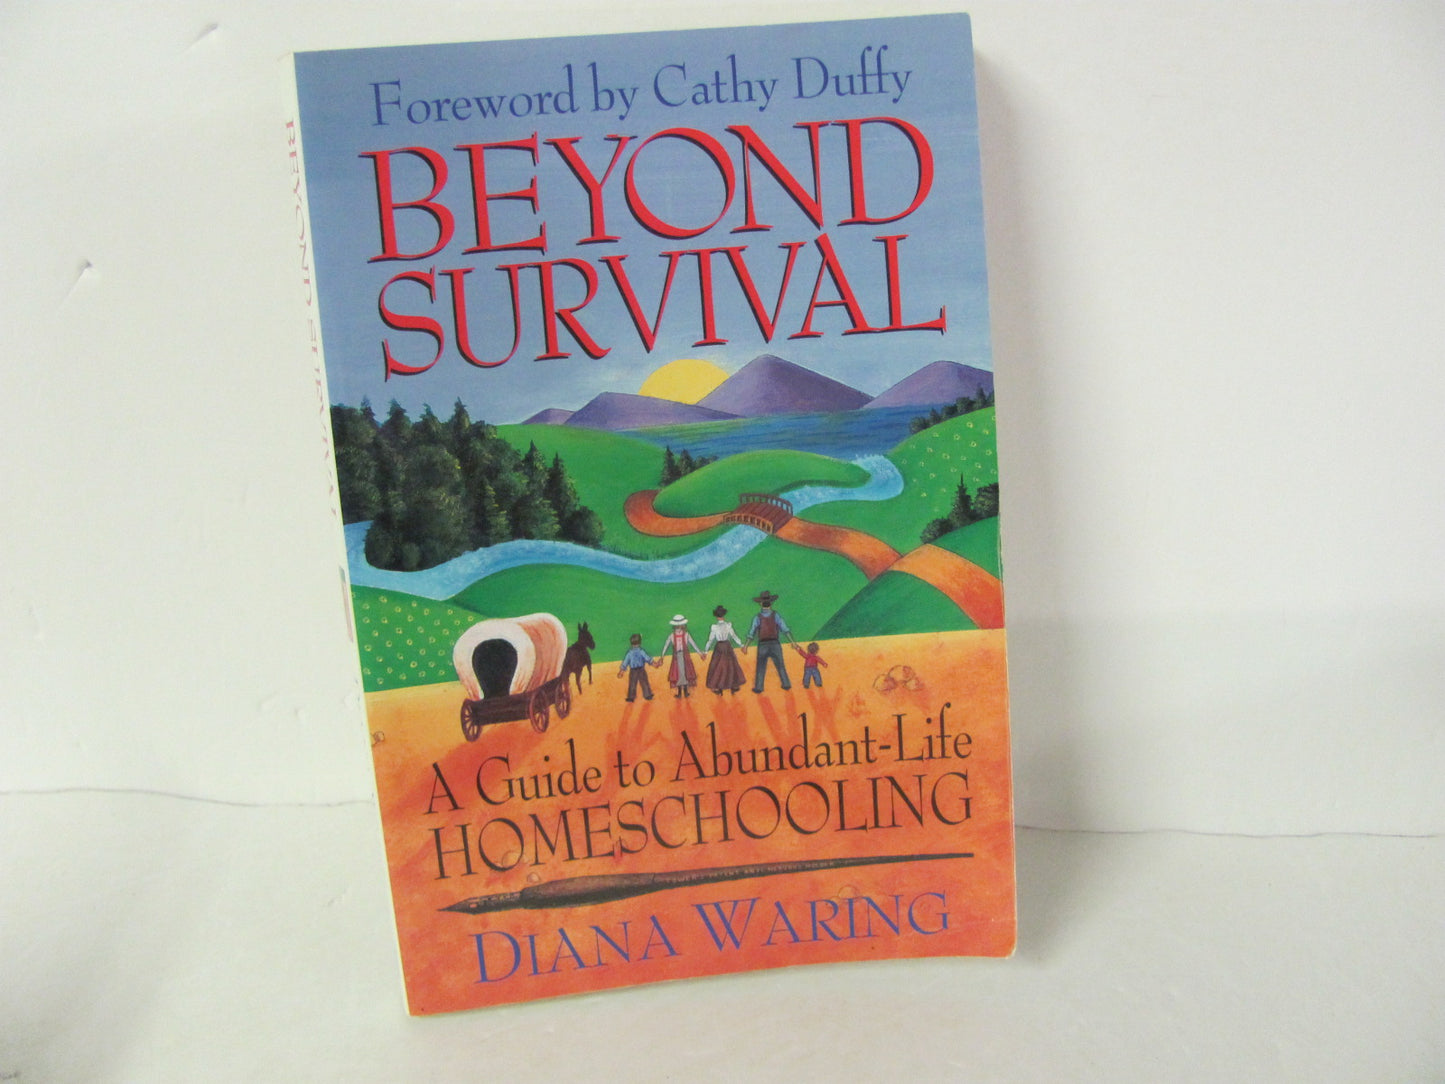 Beyond Survival Emerald Pre-Owned Waring Family/Parenting Books